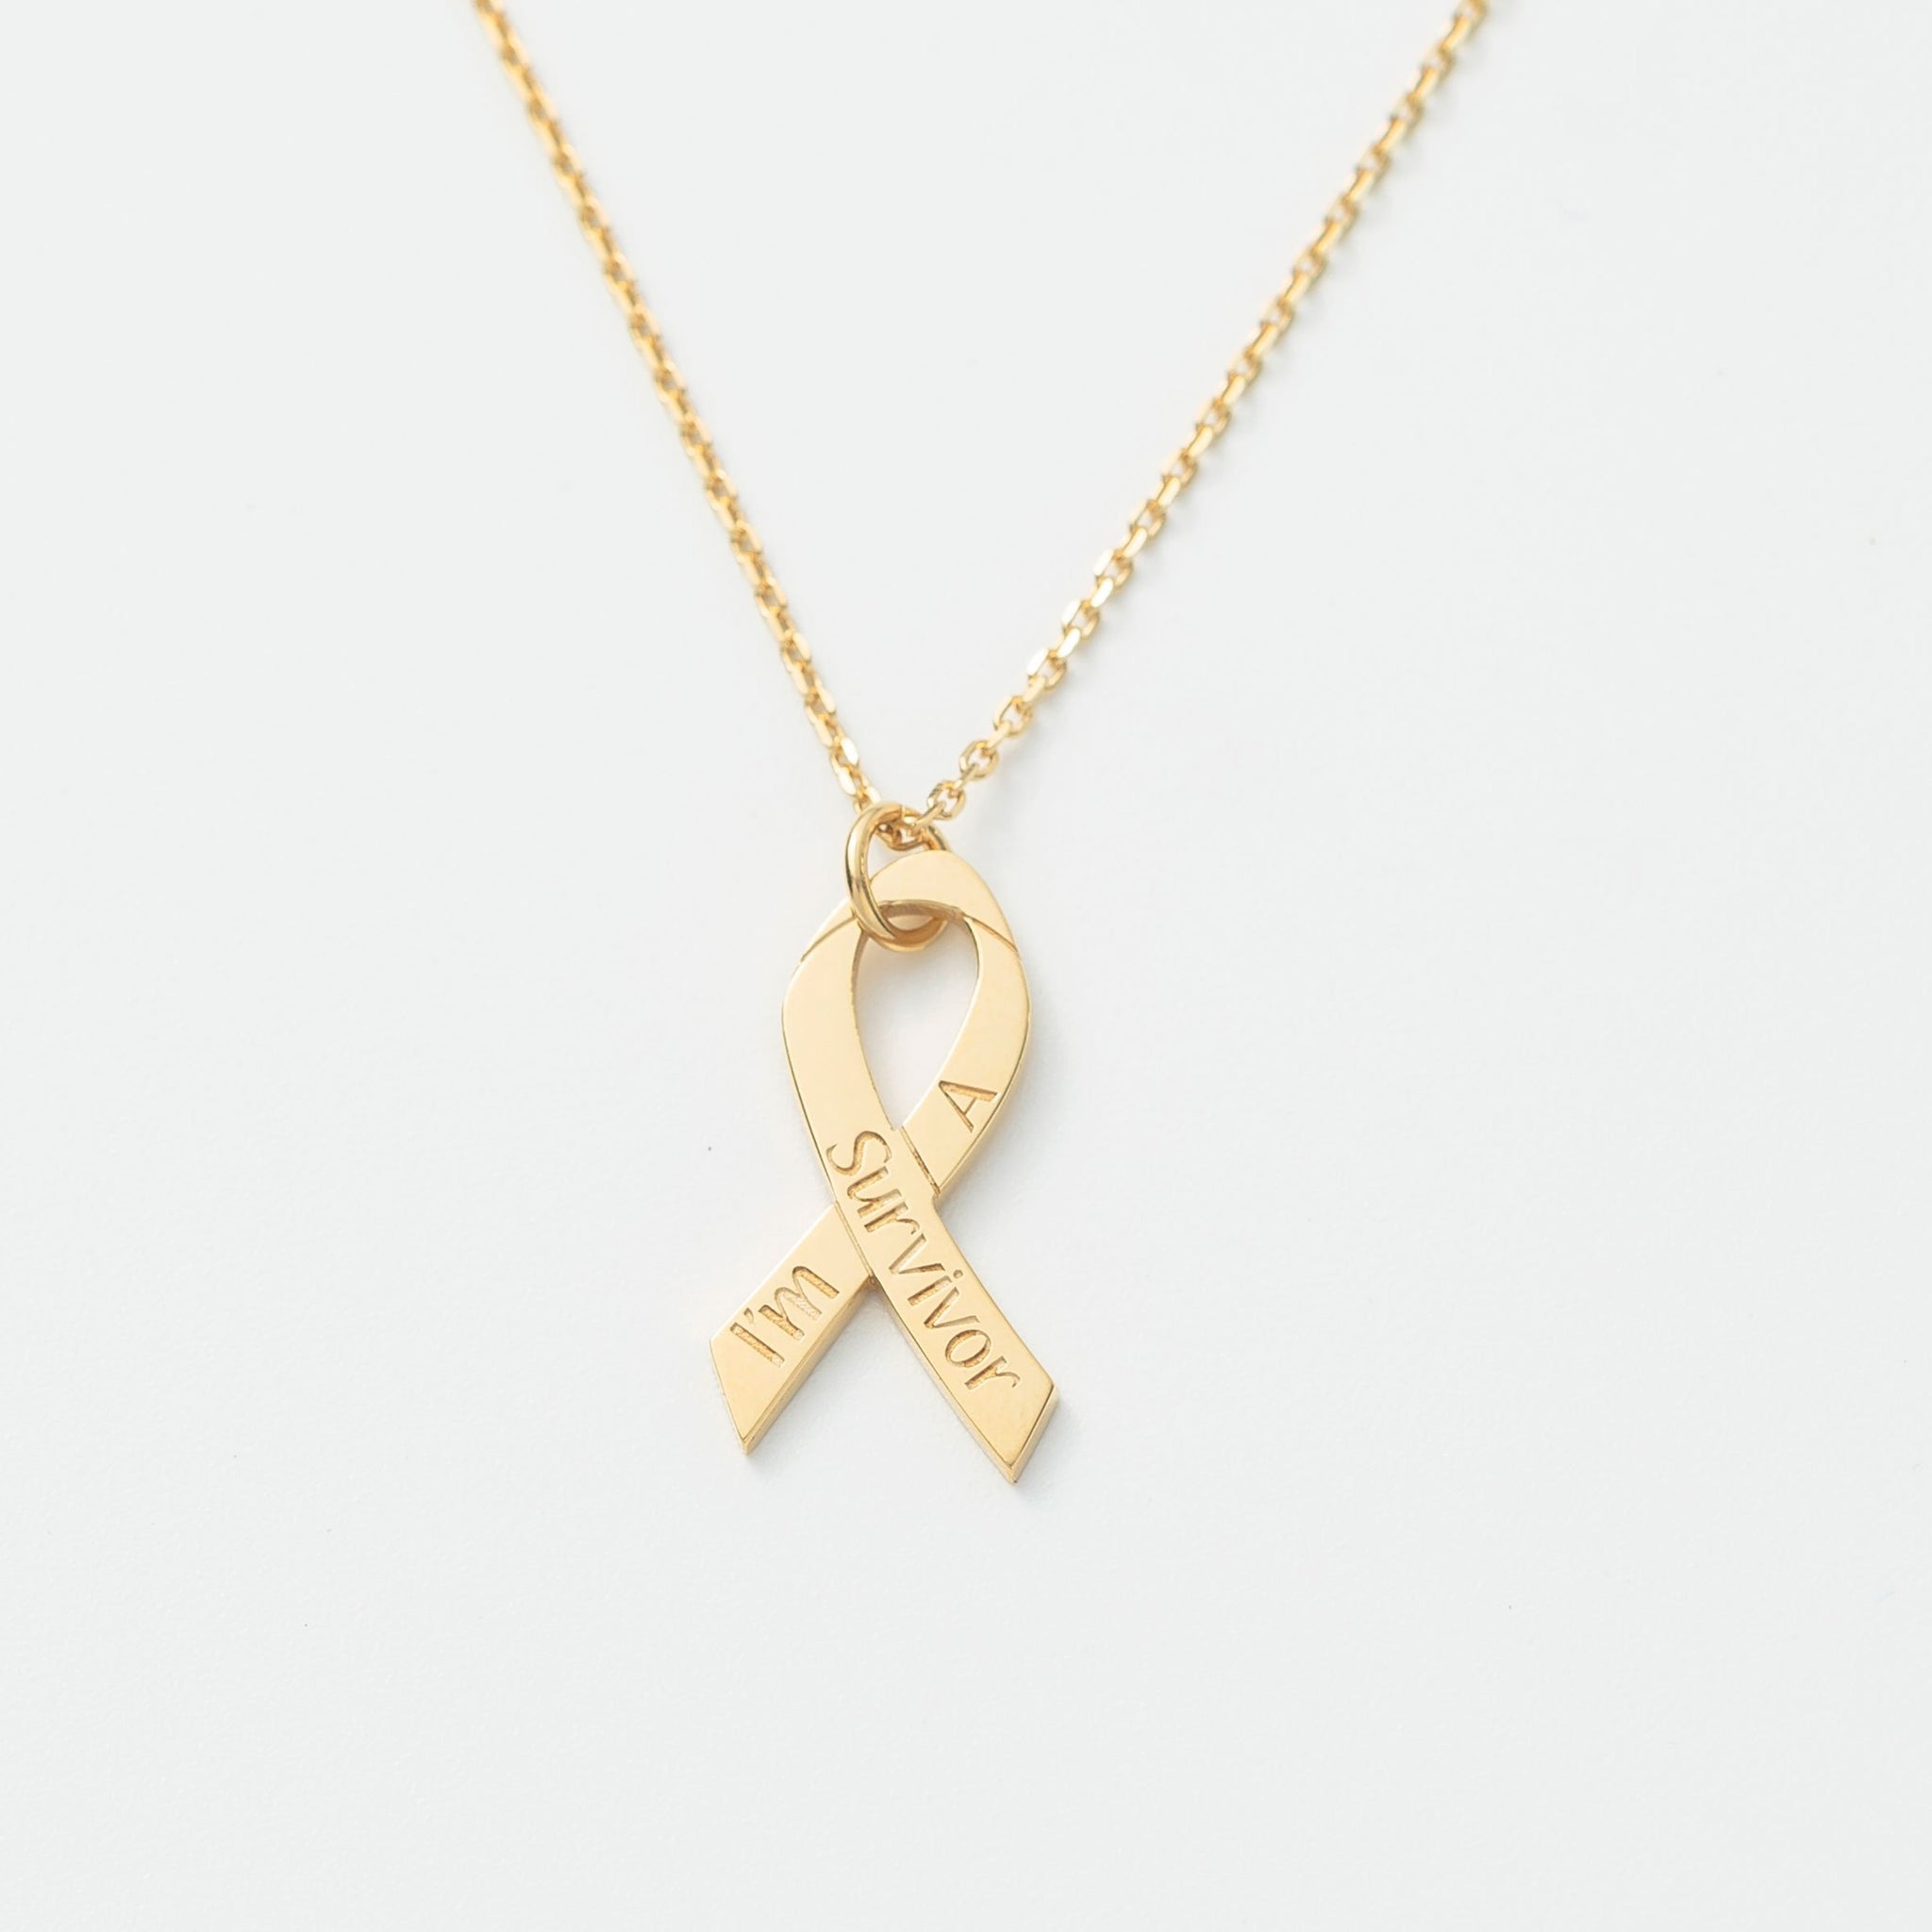 Support Breast Cancer Awareness Month 💖 - Haverhill Collection